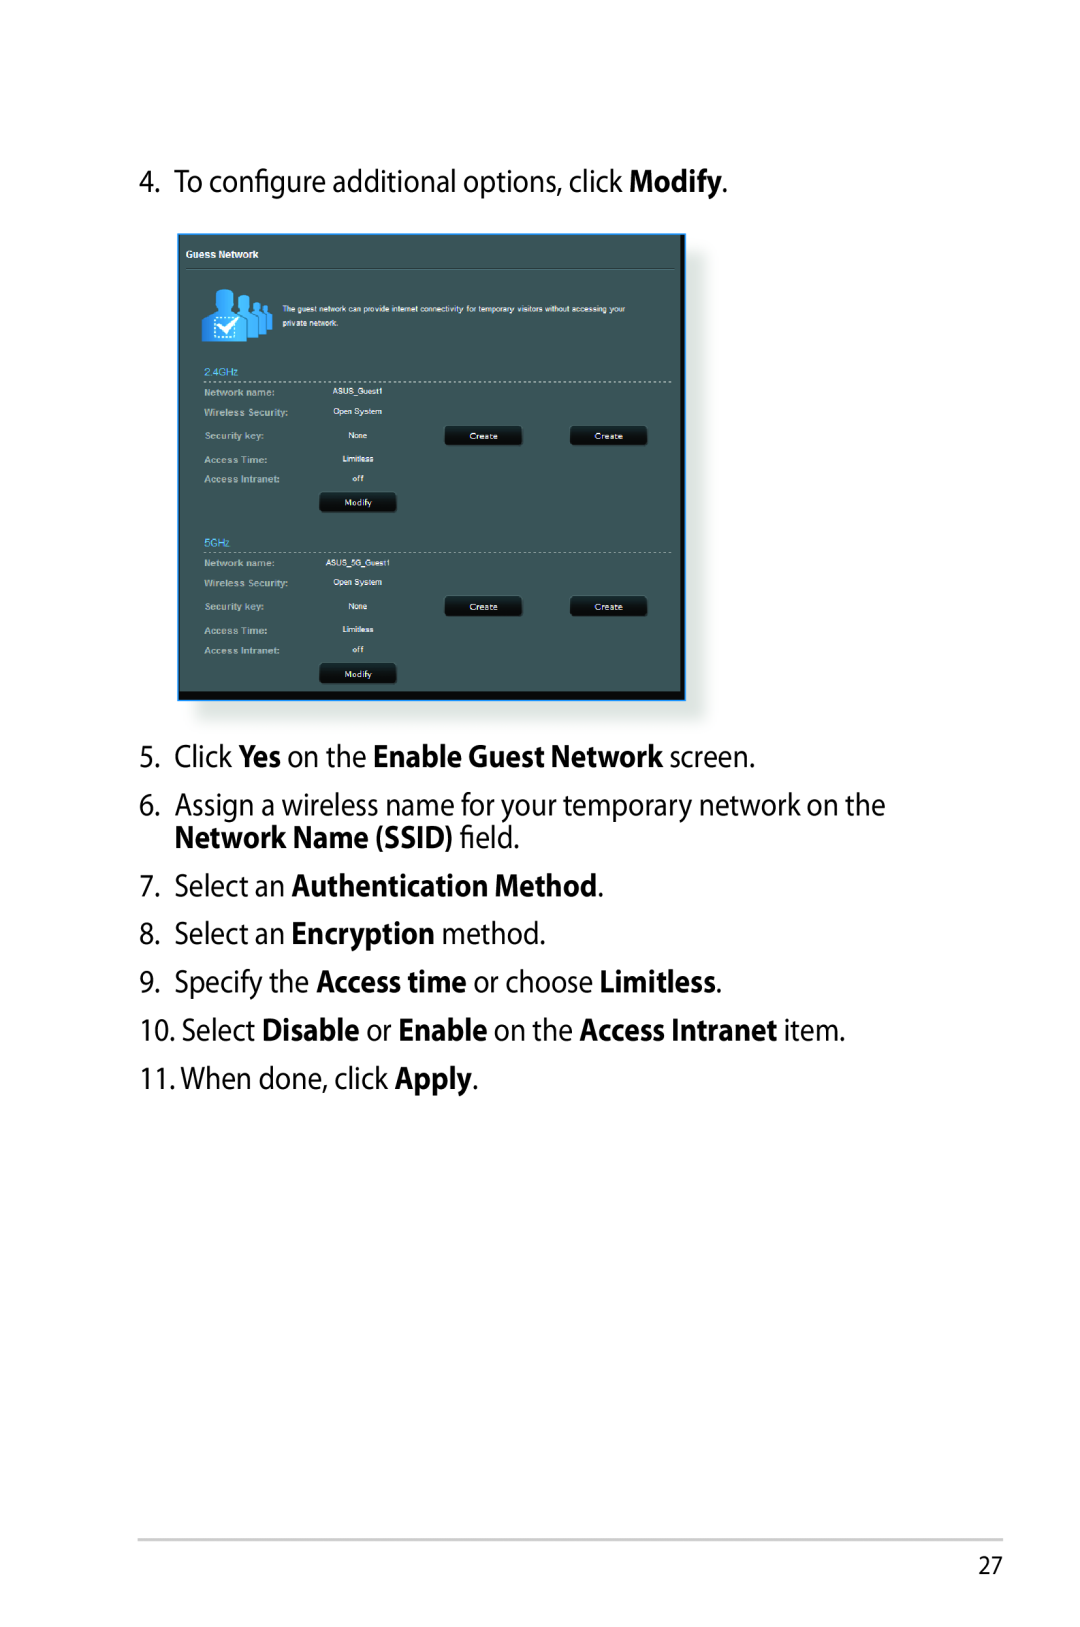 Asus RTAC68U Click Yes on the Enable Guest Network screen, Select an Authentication Method, Select an Encryption method 